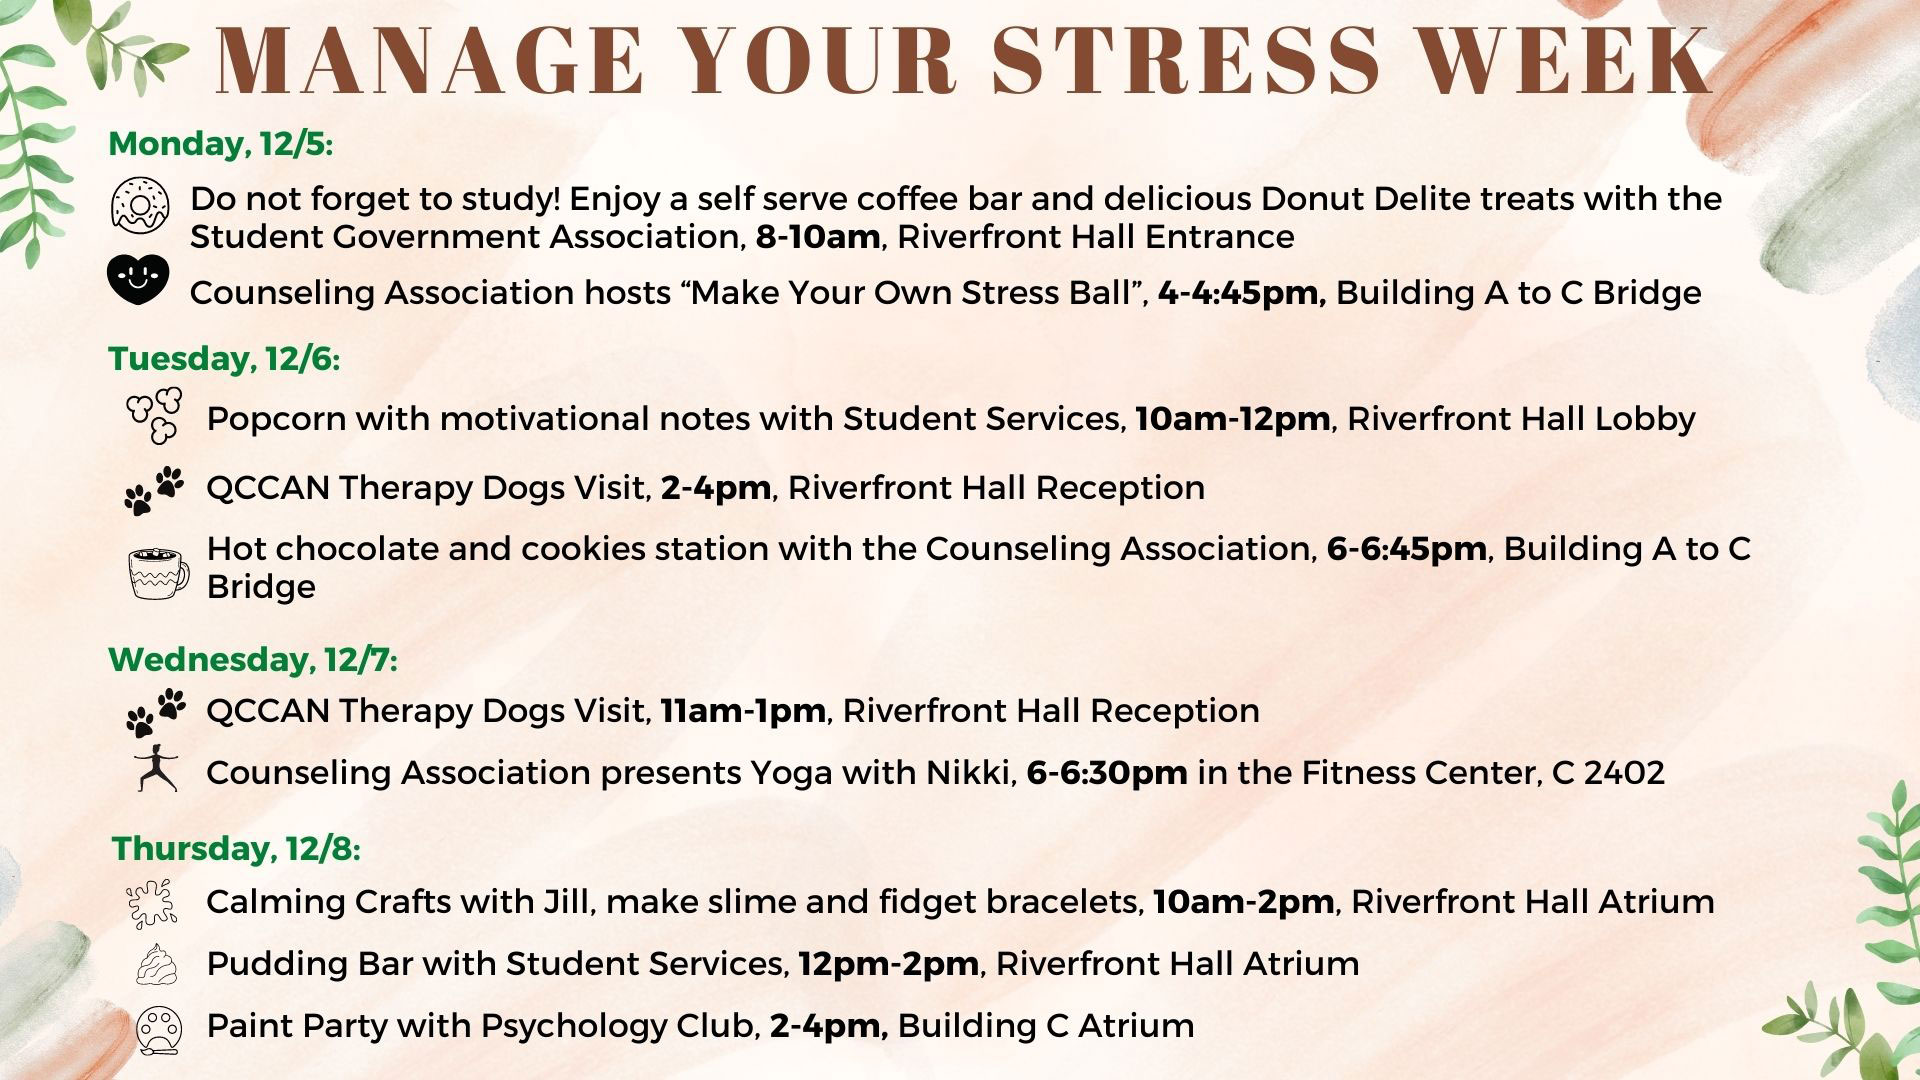 Manage Your Stress Week schedule